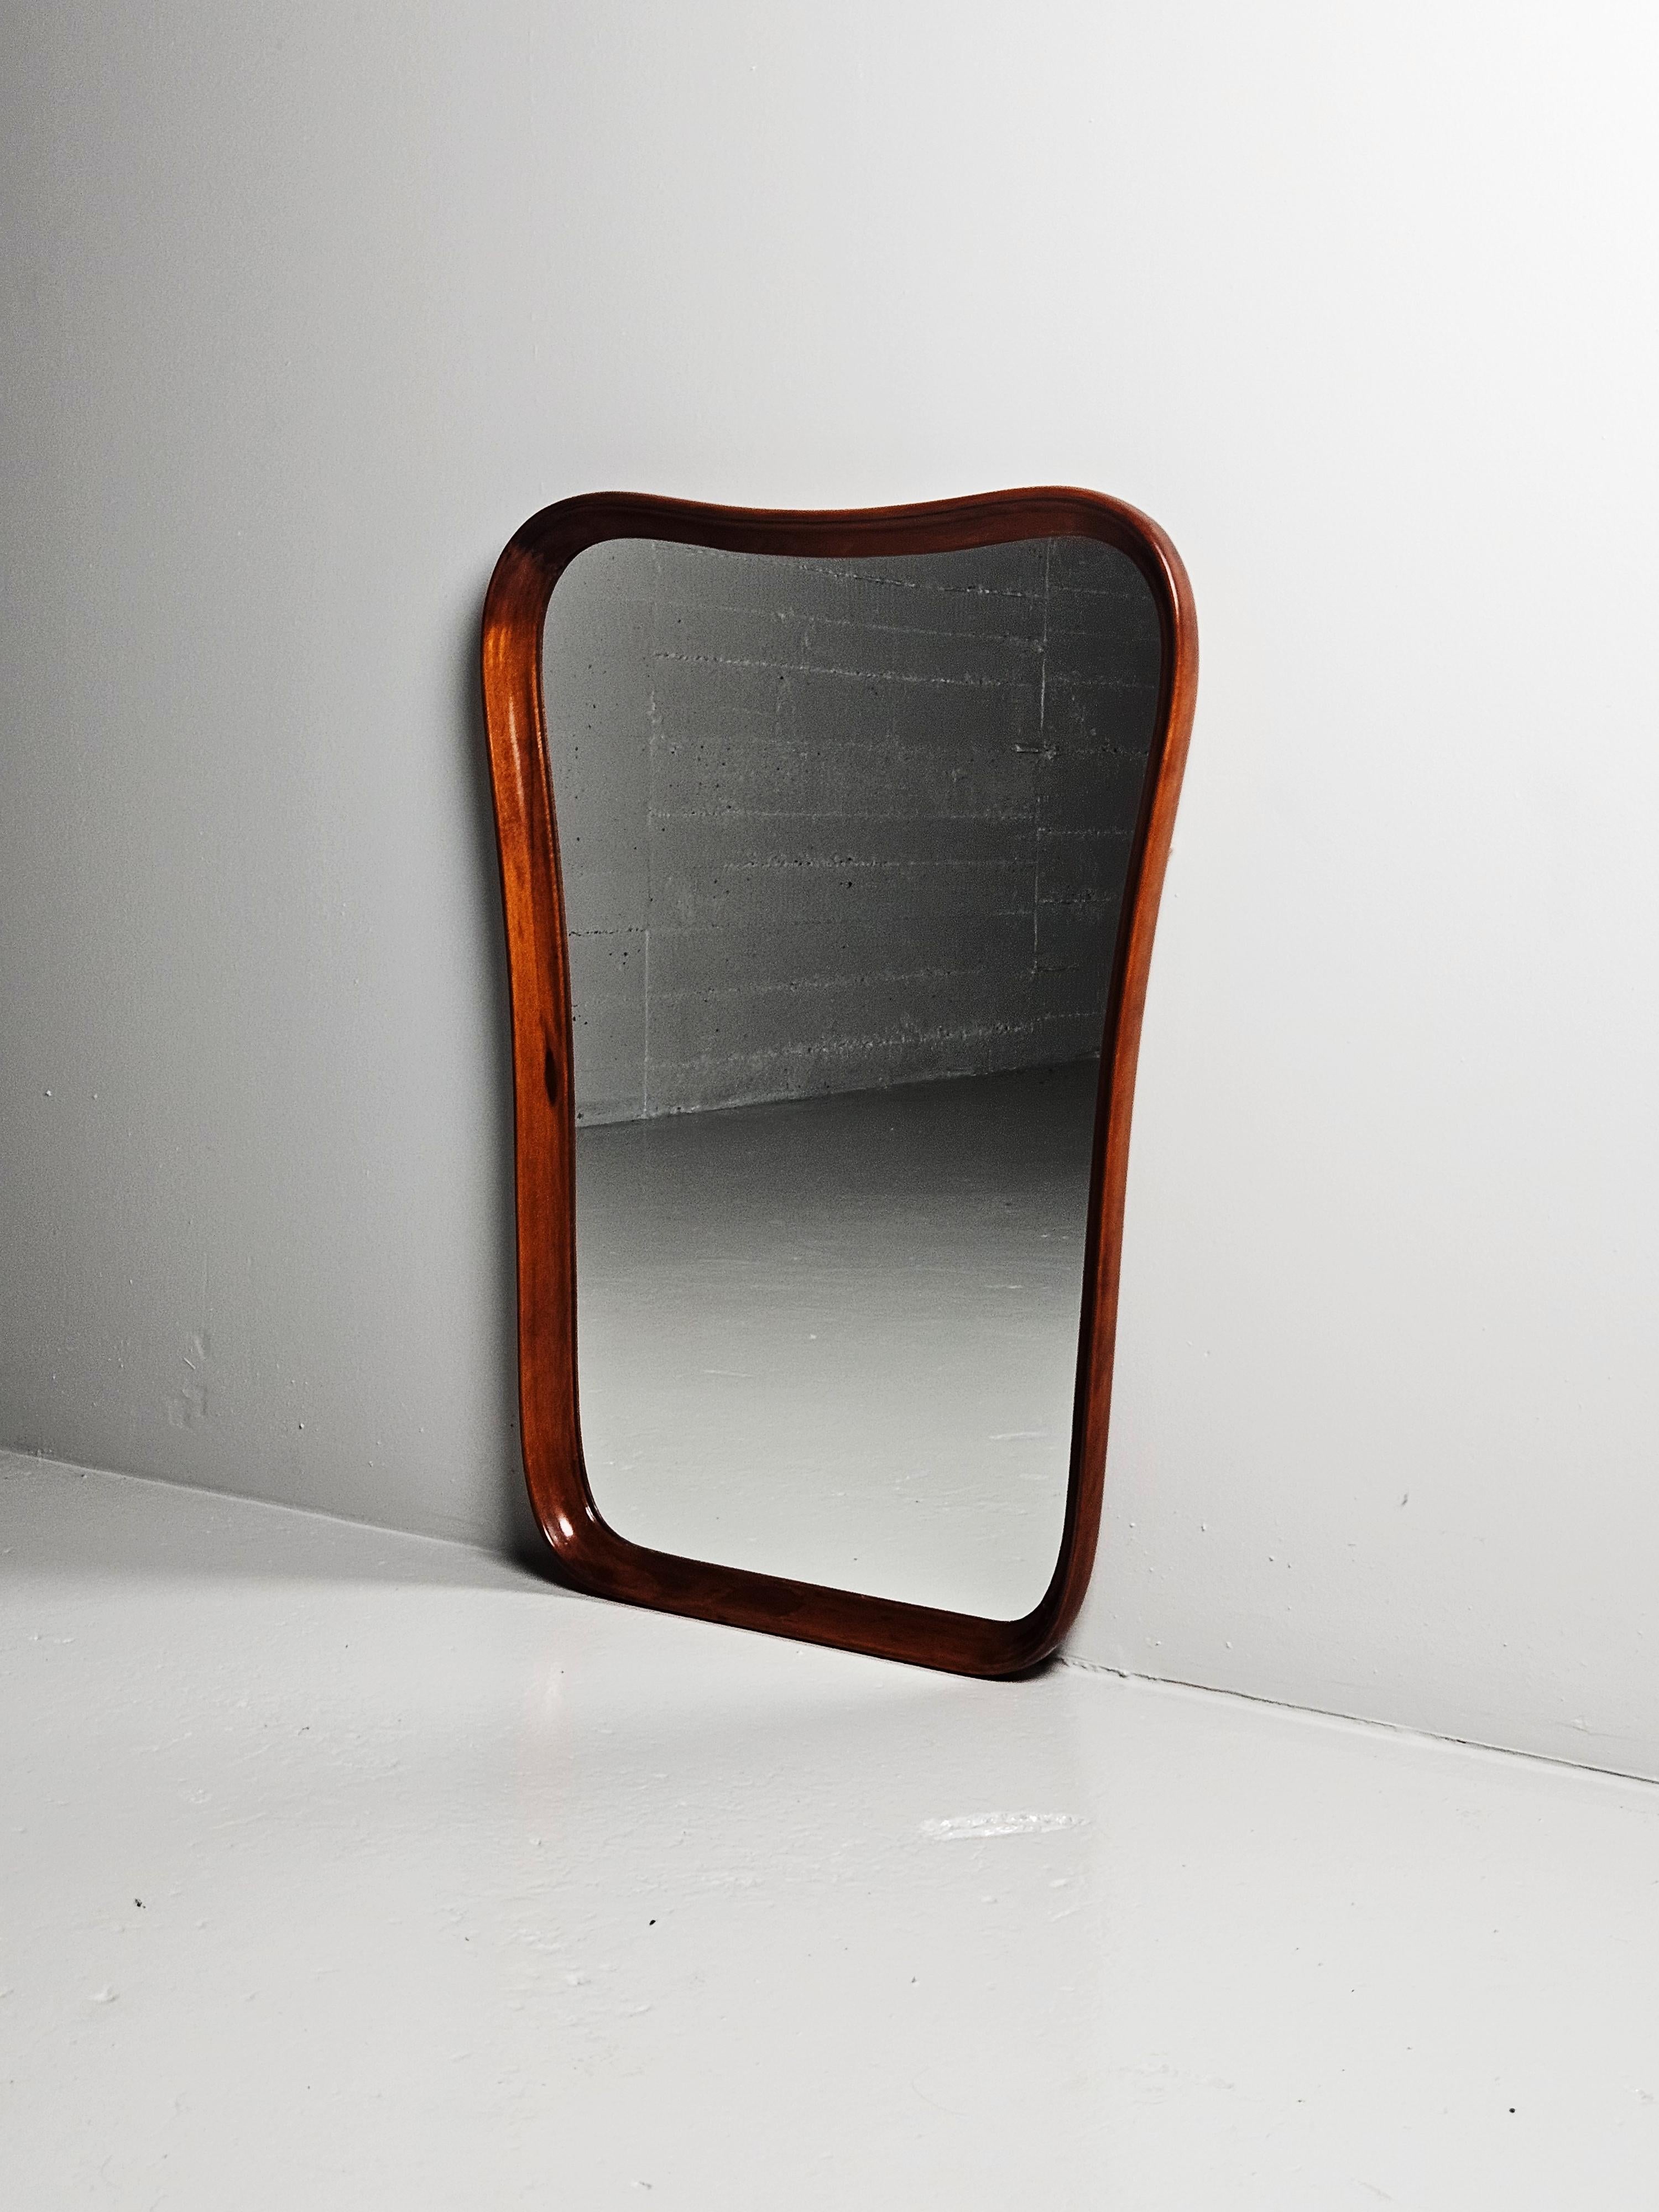 Large sculptural wall mirror produced in Sweden during the 1940s. 

The mirror frame is stained walnut wood and made with curvy sculptural lines.